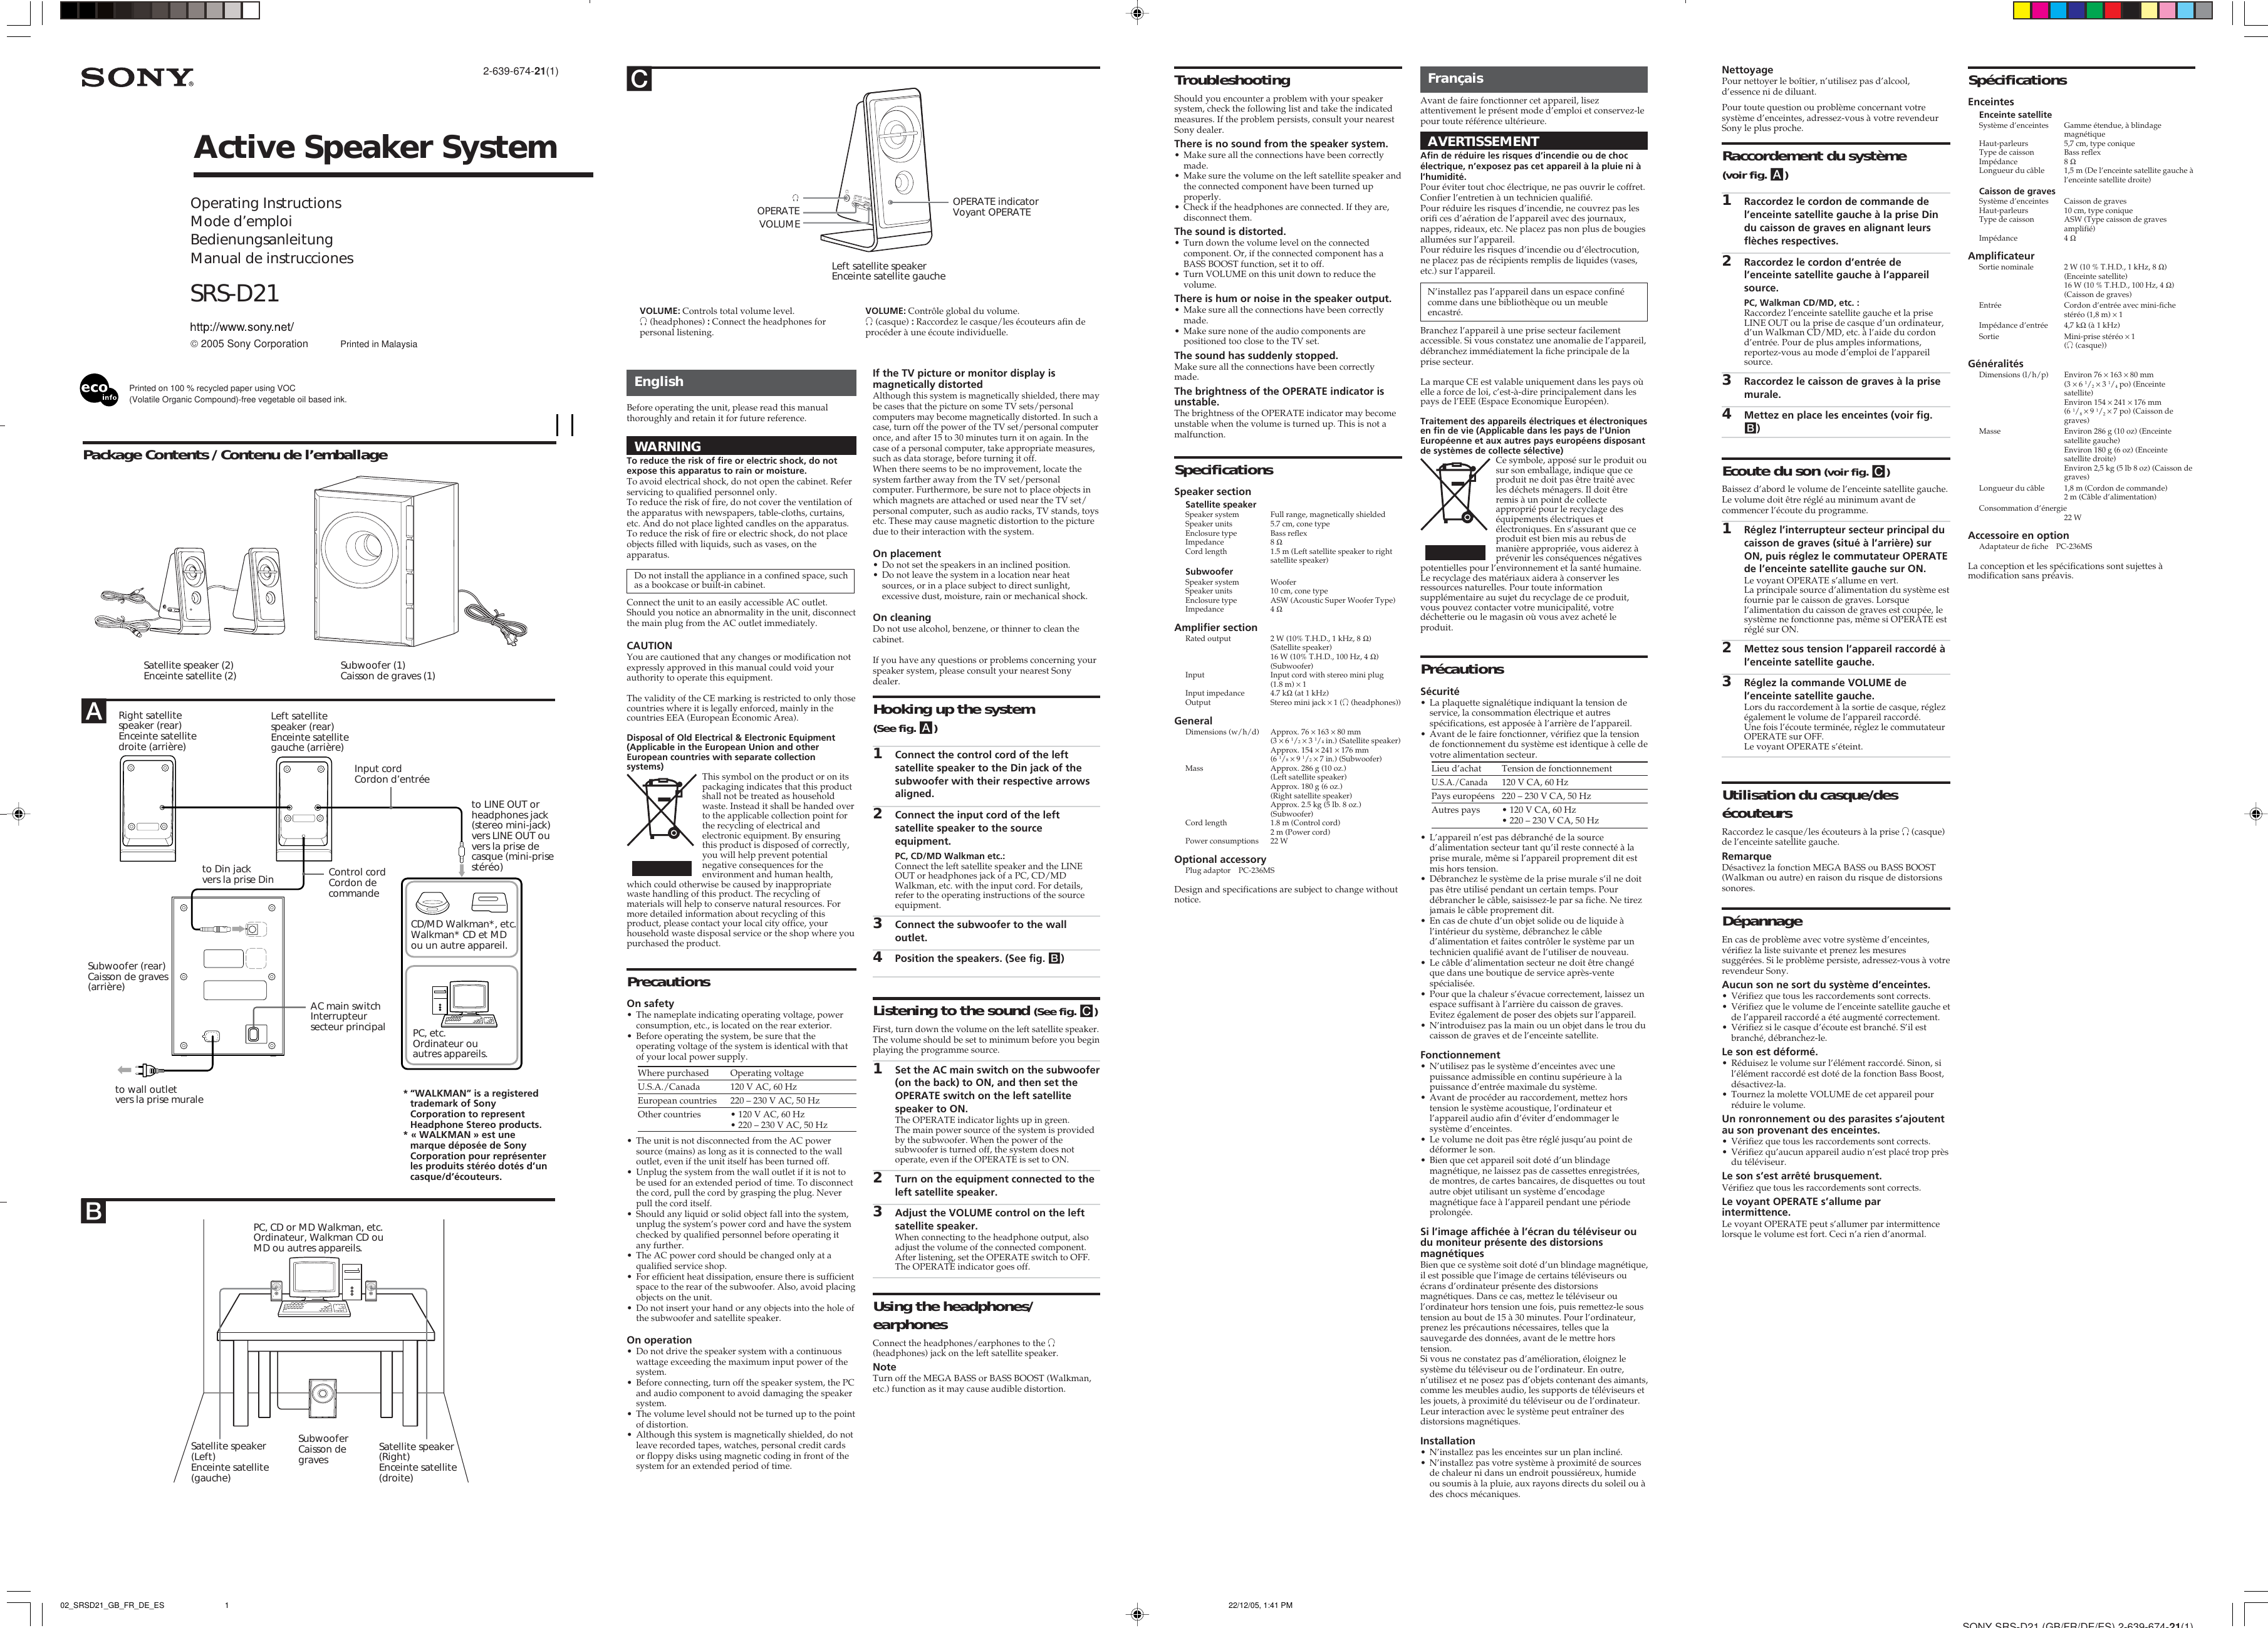 Page 1 of 2 - Sony Sony-Srs-D21-Users-Manual- SRS-D21  Sony-srs-d21-users-manual